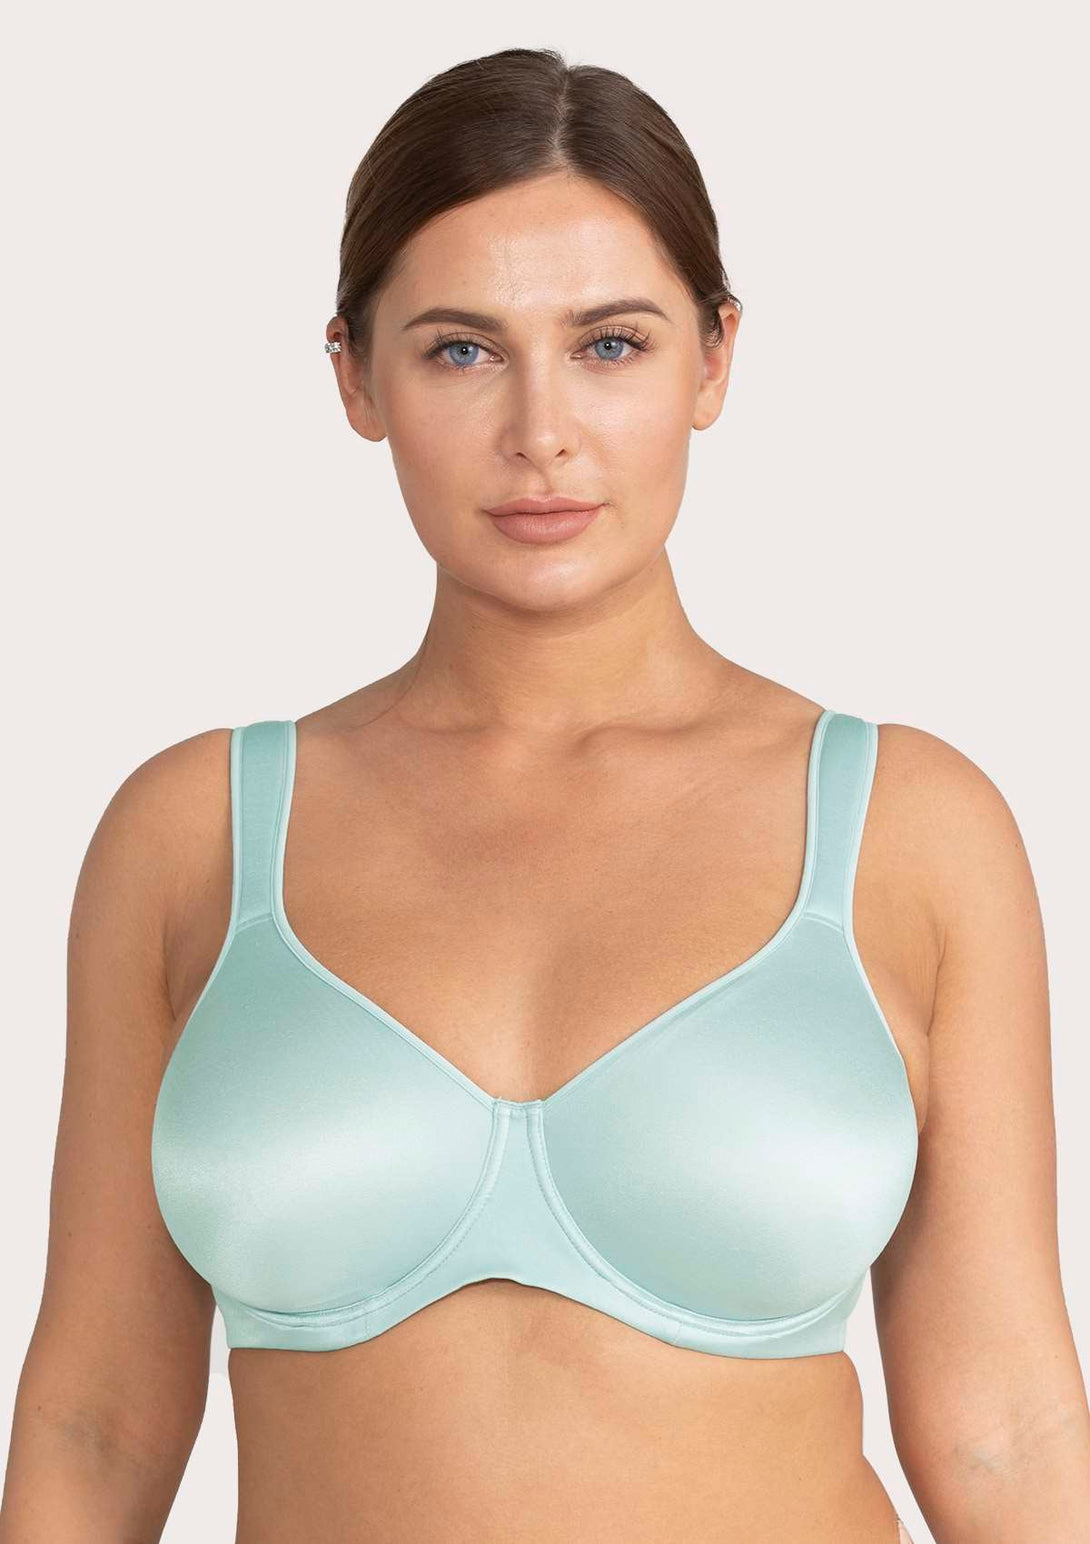 HSIA HSIA Blue Unlined Full Coverage Minimizer Bra Crystal Blue / 34C